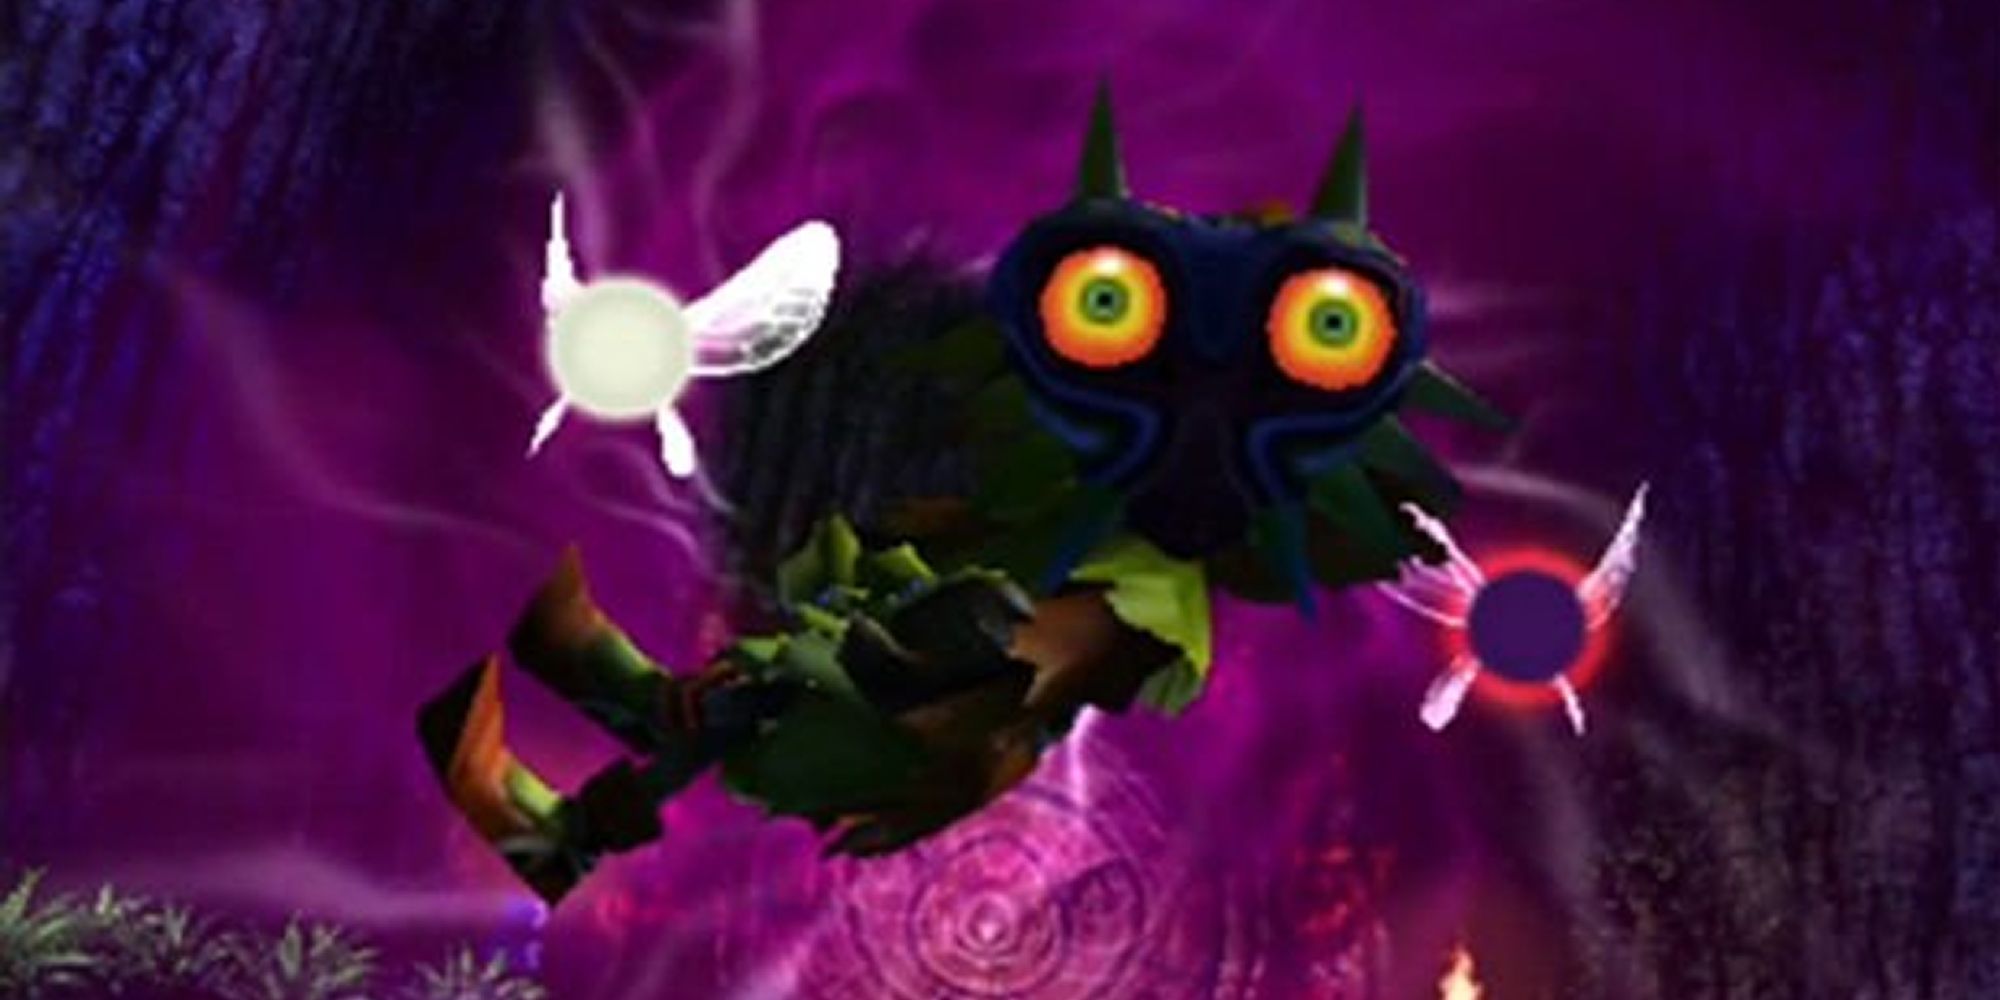 Skull Kid Floats With His Fairy Friends